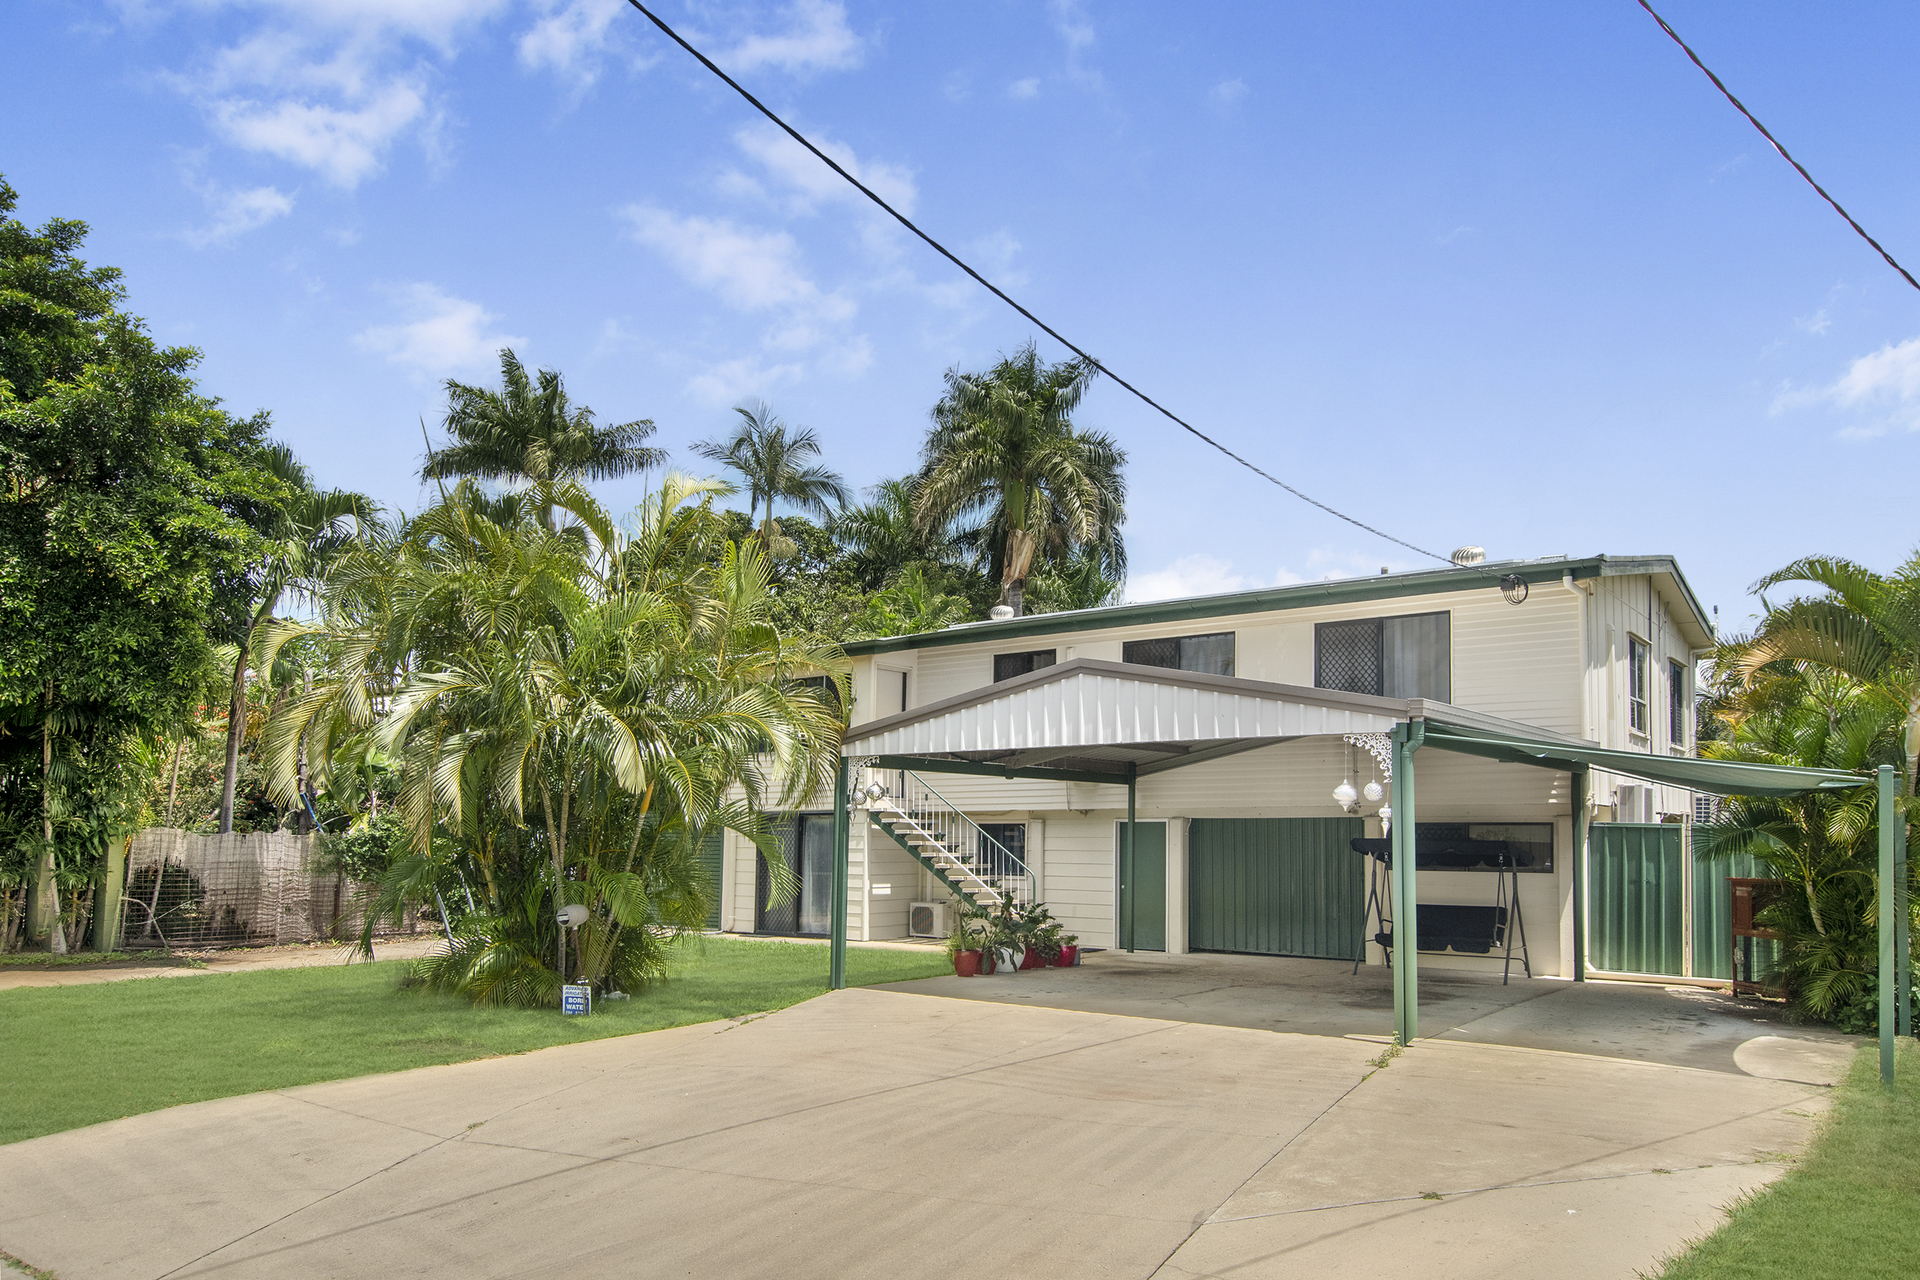 Property in Currajong - Sold for $375,000